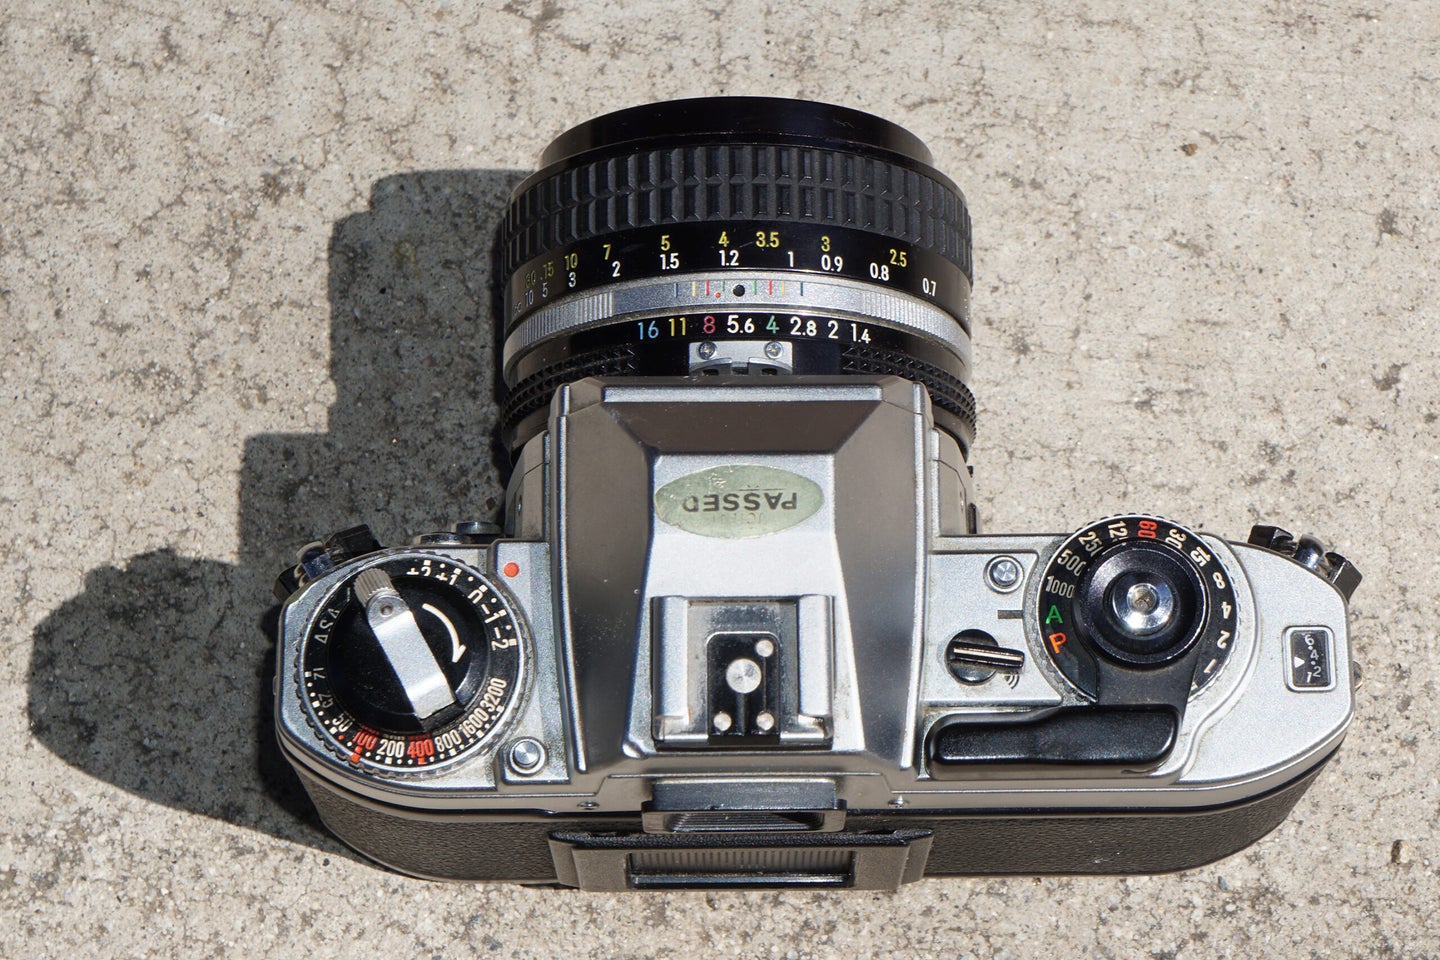 The Nikon FG film camera from above